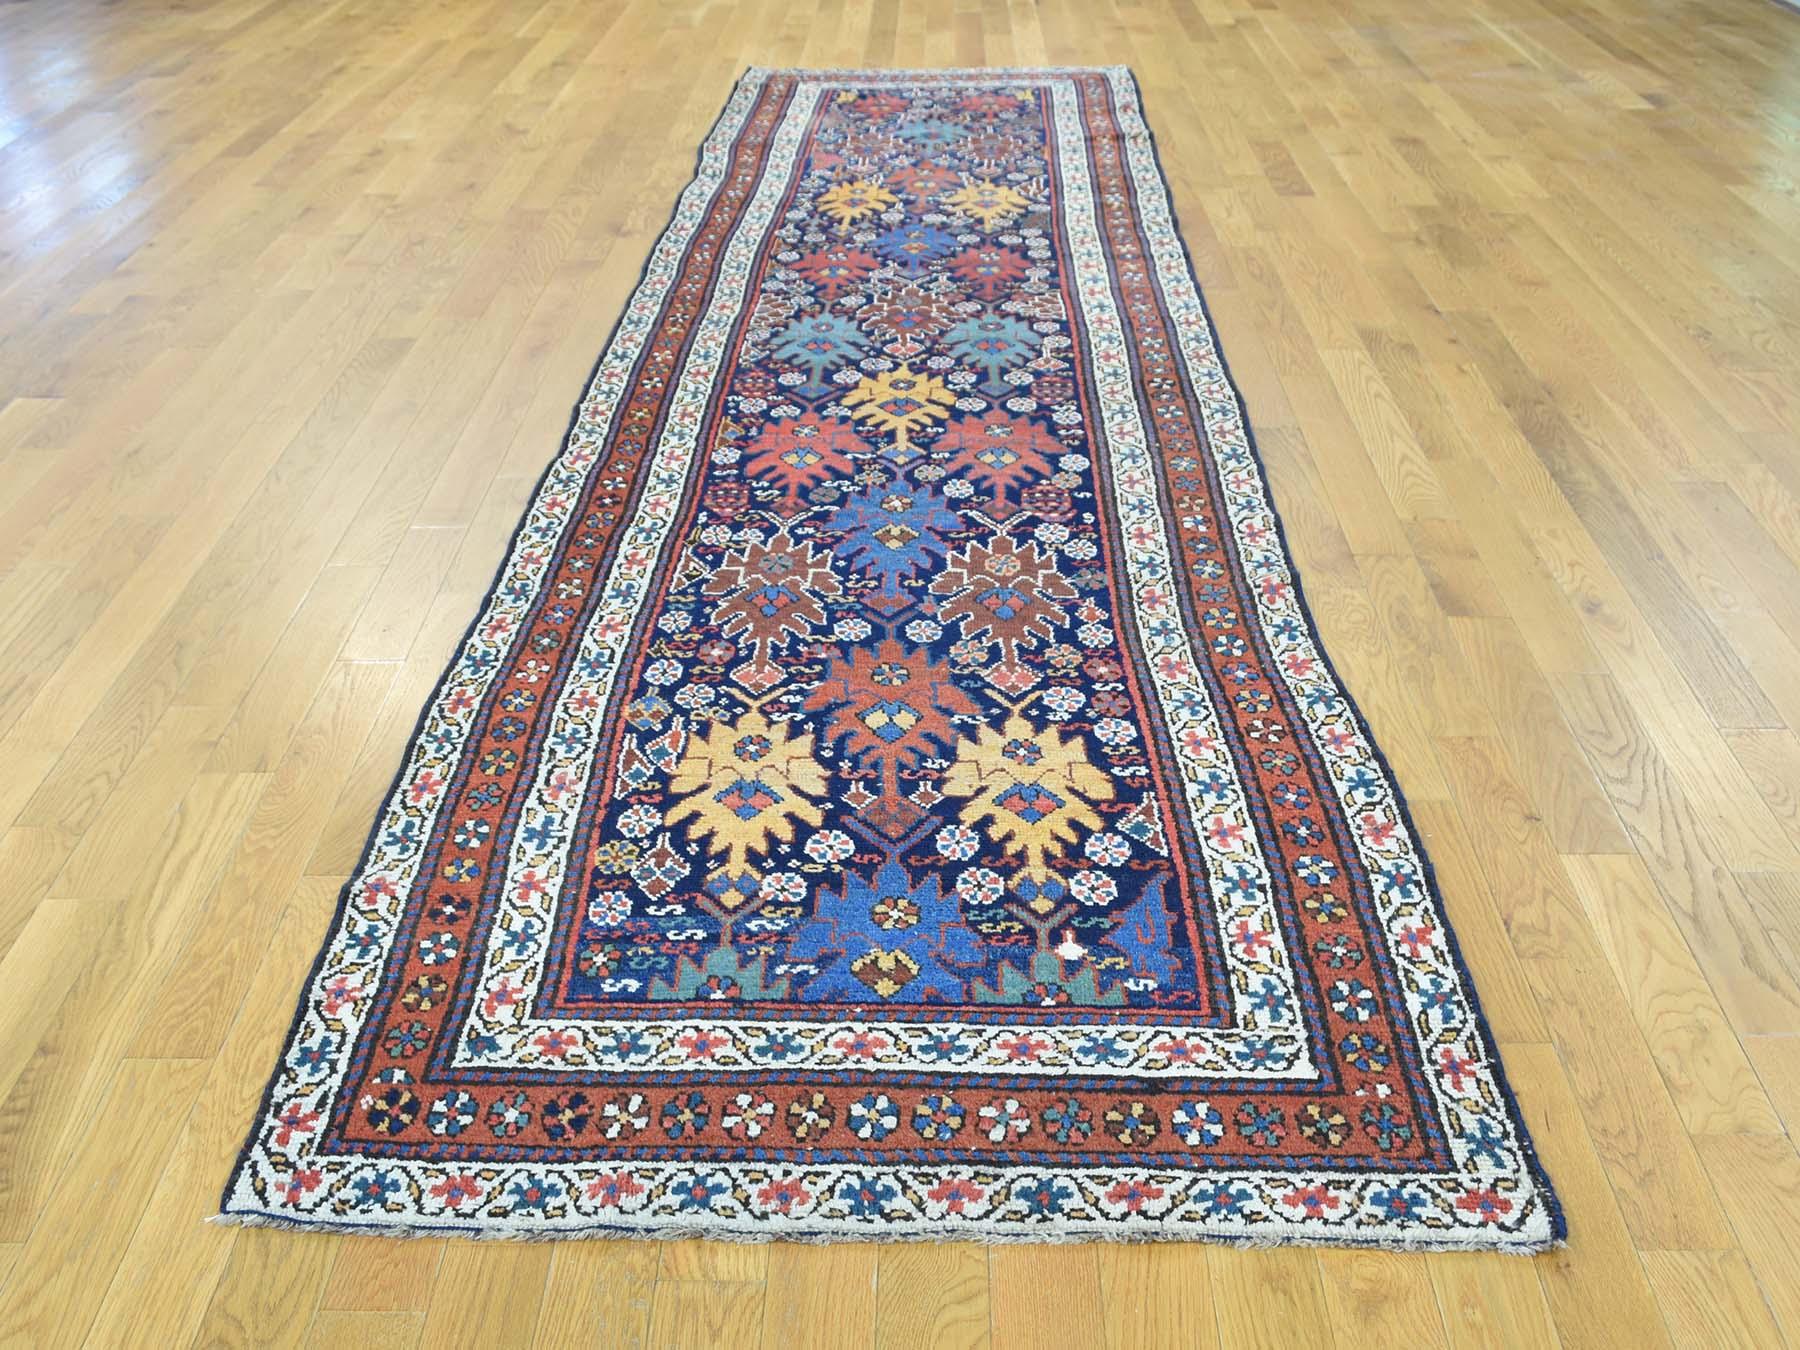 This is a genuine hand knotted oriental rug. It is not hand tufted or machine made rug. Our entire inventory is made of either hand knotted or handwoven rugs.

Enhance your room style with this marvellous full pile carpet. This handcrafted antique